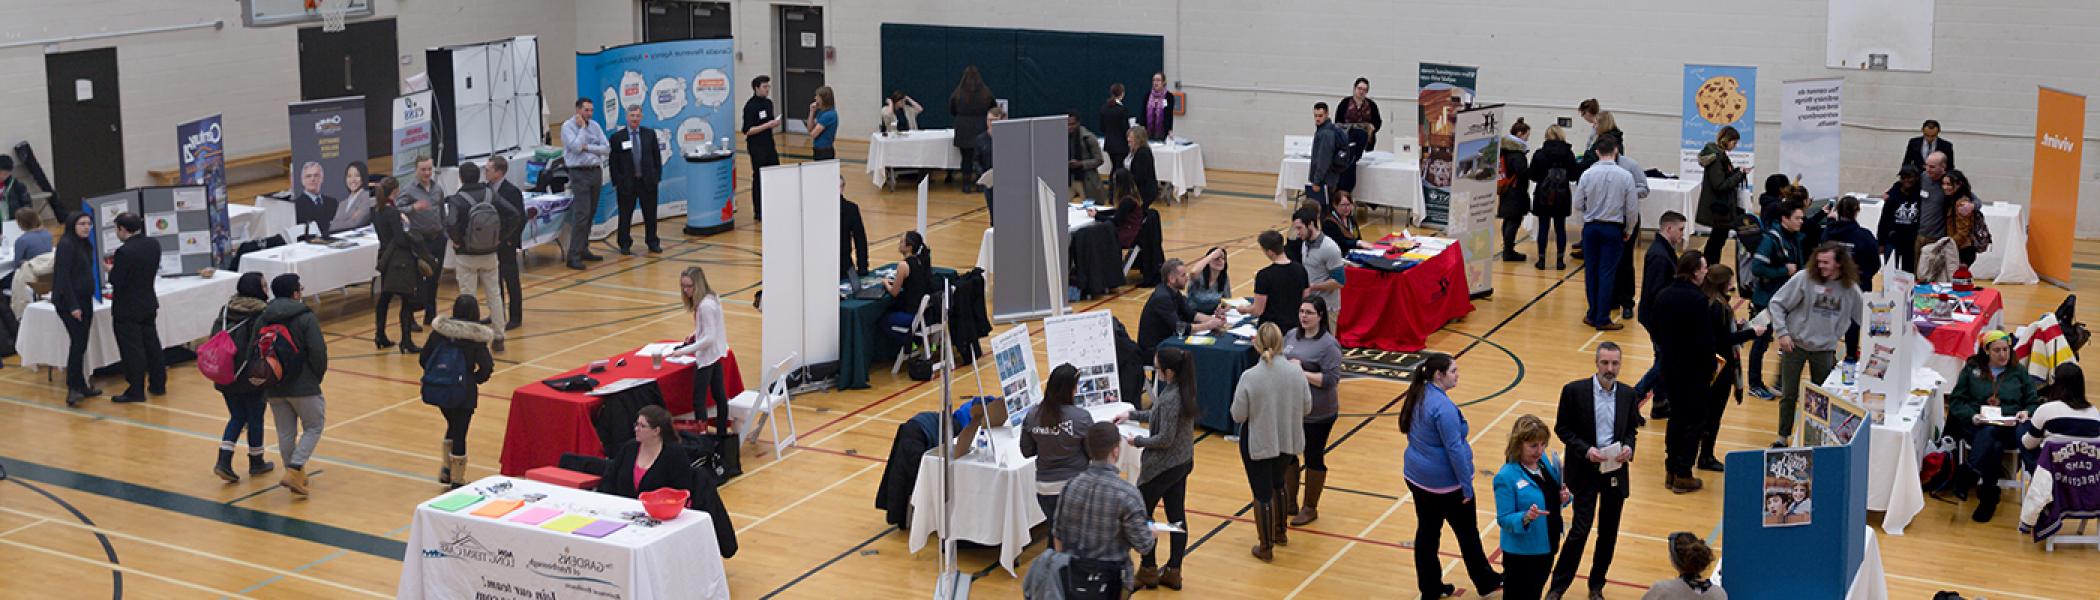 a career fair put on by career services at trent university in the justin chiu athletics centre